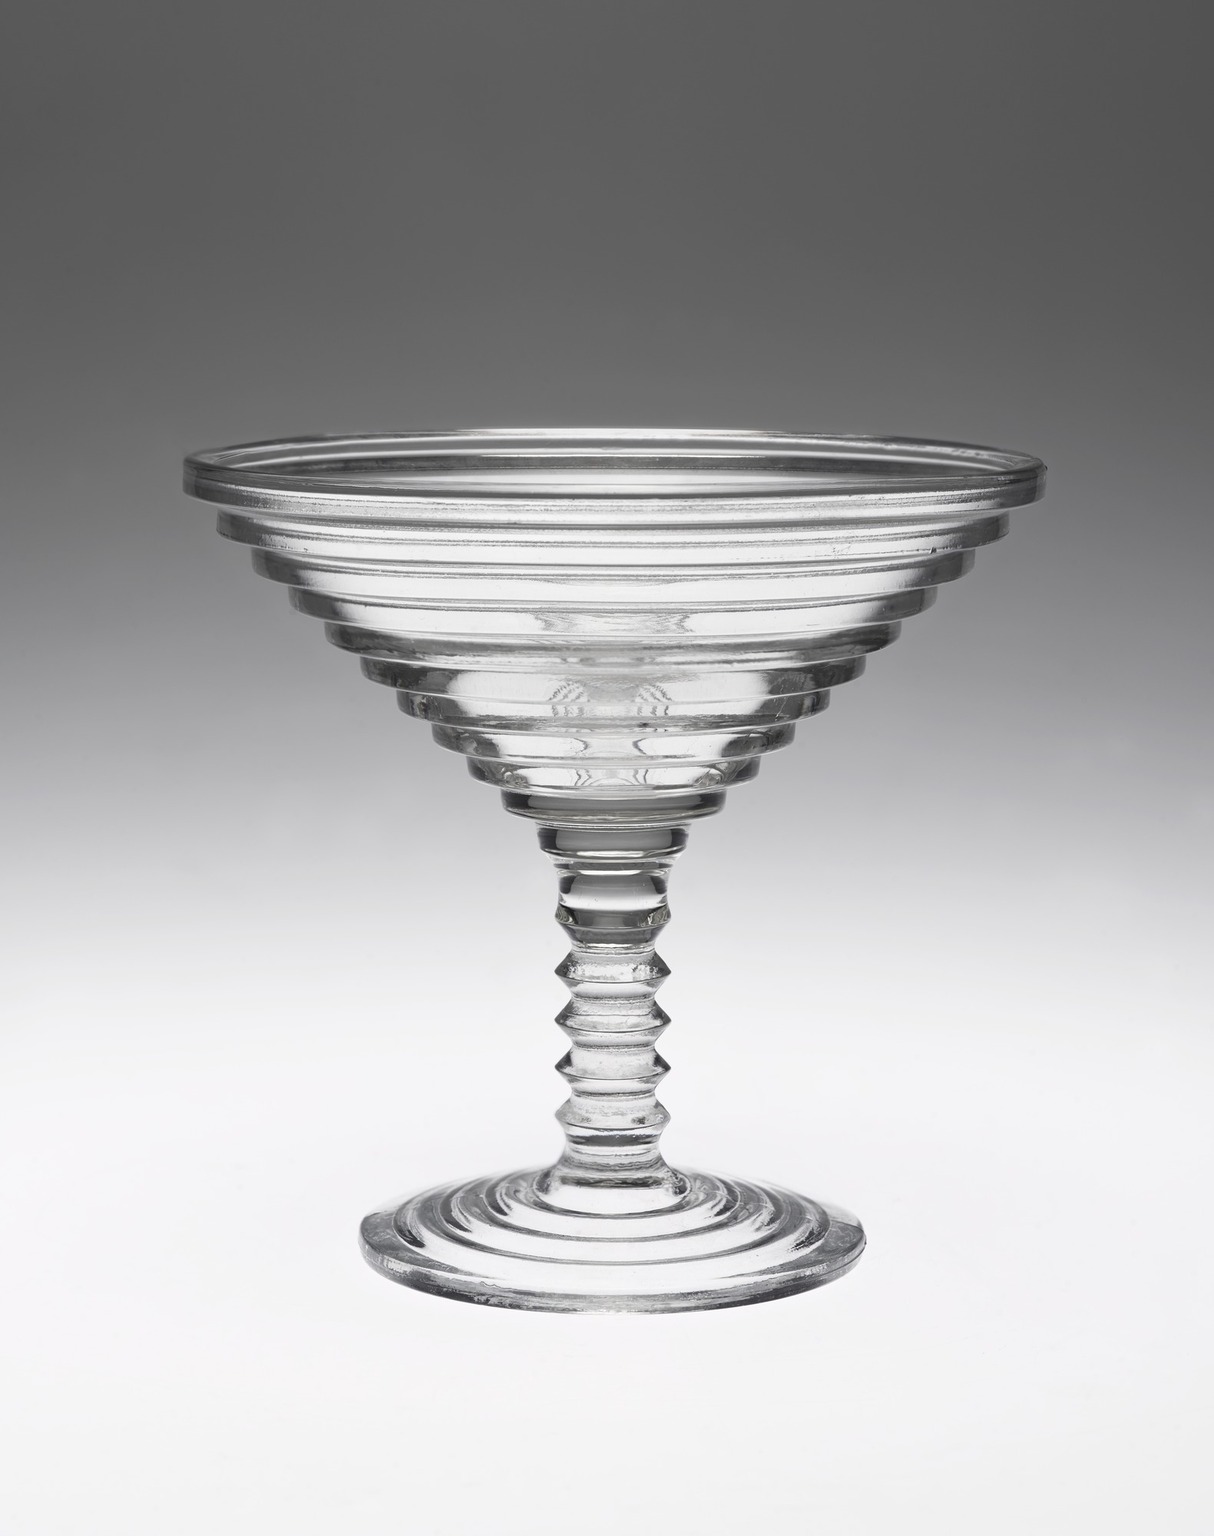 art deco Anchor Hocking Manhattan crystal clear glass compotes, big martini  cocktail glasses!